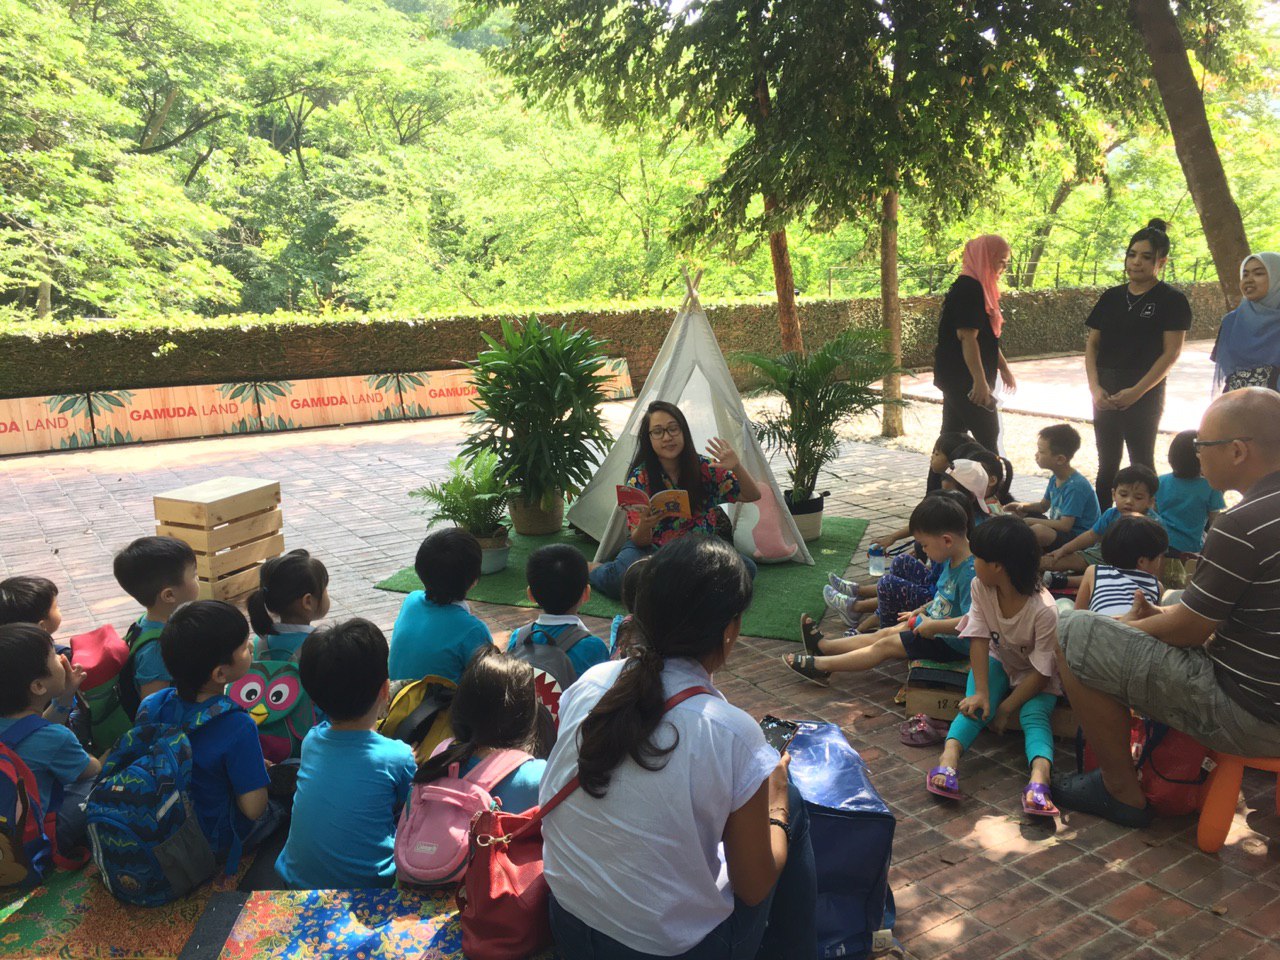 [PRESS RELEASE] EcoKnights Celebrated the International Day for Biological Diversity in conjunction with the Gamuda Parks (GParks) Ranger Initiative through Nature-themed Workshops and Programs